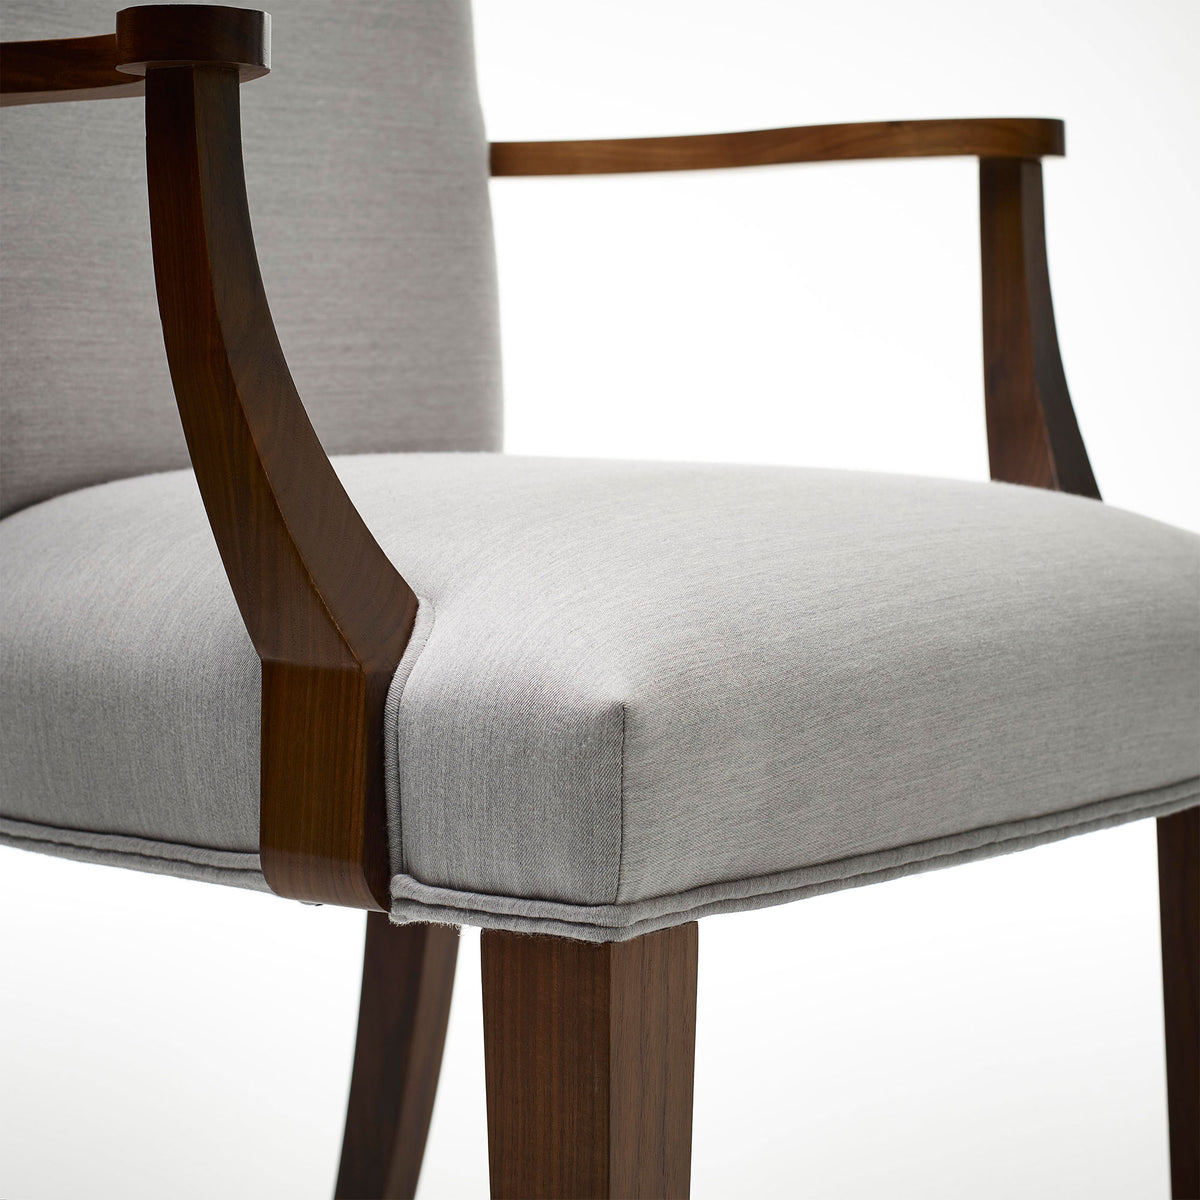 LINLEY Classic Carver Dining Chair | Bespoke Design & Luxury Furniture | LINLEY